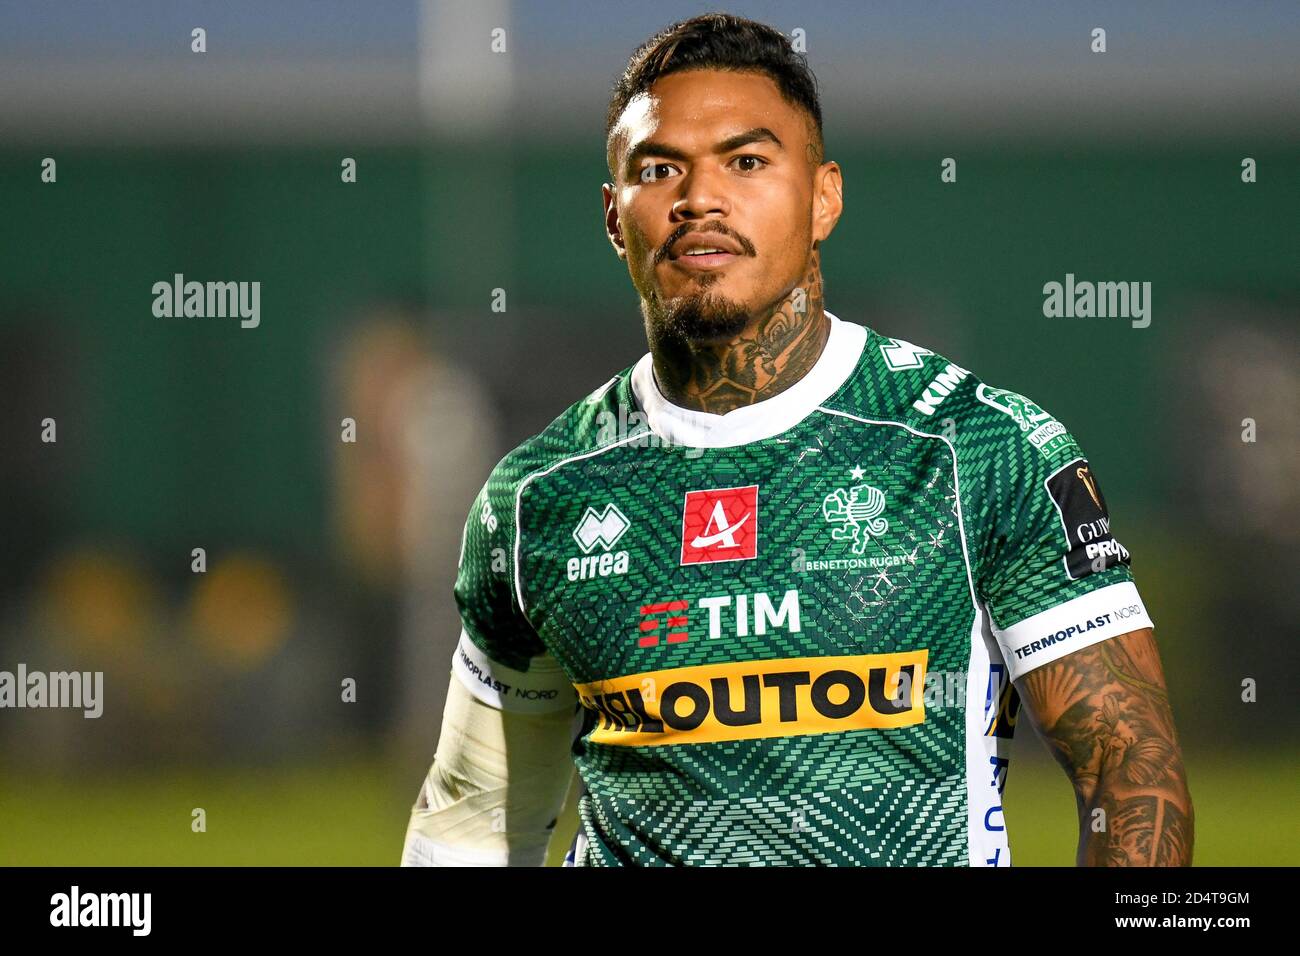 onty Ioane (Treviso) during Benetton Treviso vs Leinster Rugby, Rugby Guinness Pro 14, Treviso, Italy, 10 Oct 2020 Credit: LM/Ettore Griffoni Stock Photo